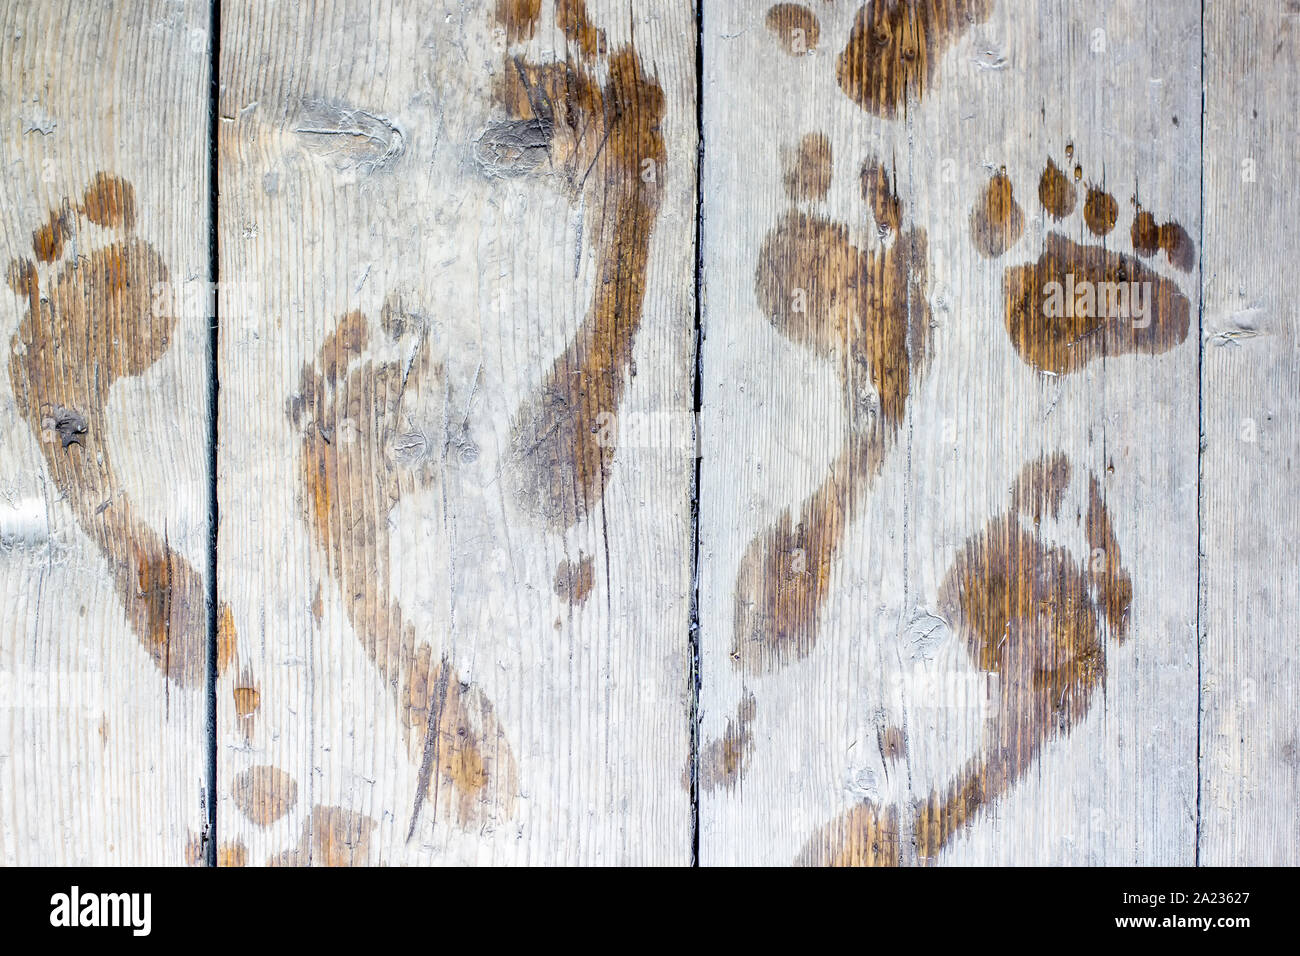 lots wet footprints on the of man an old wooden planks, outdoor Stock Photo